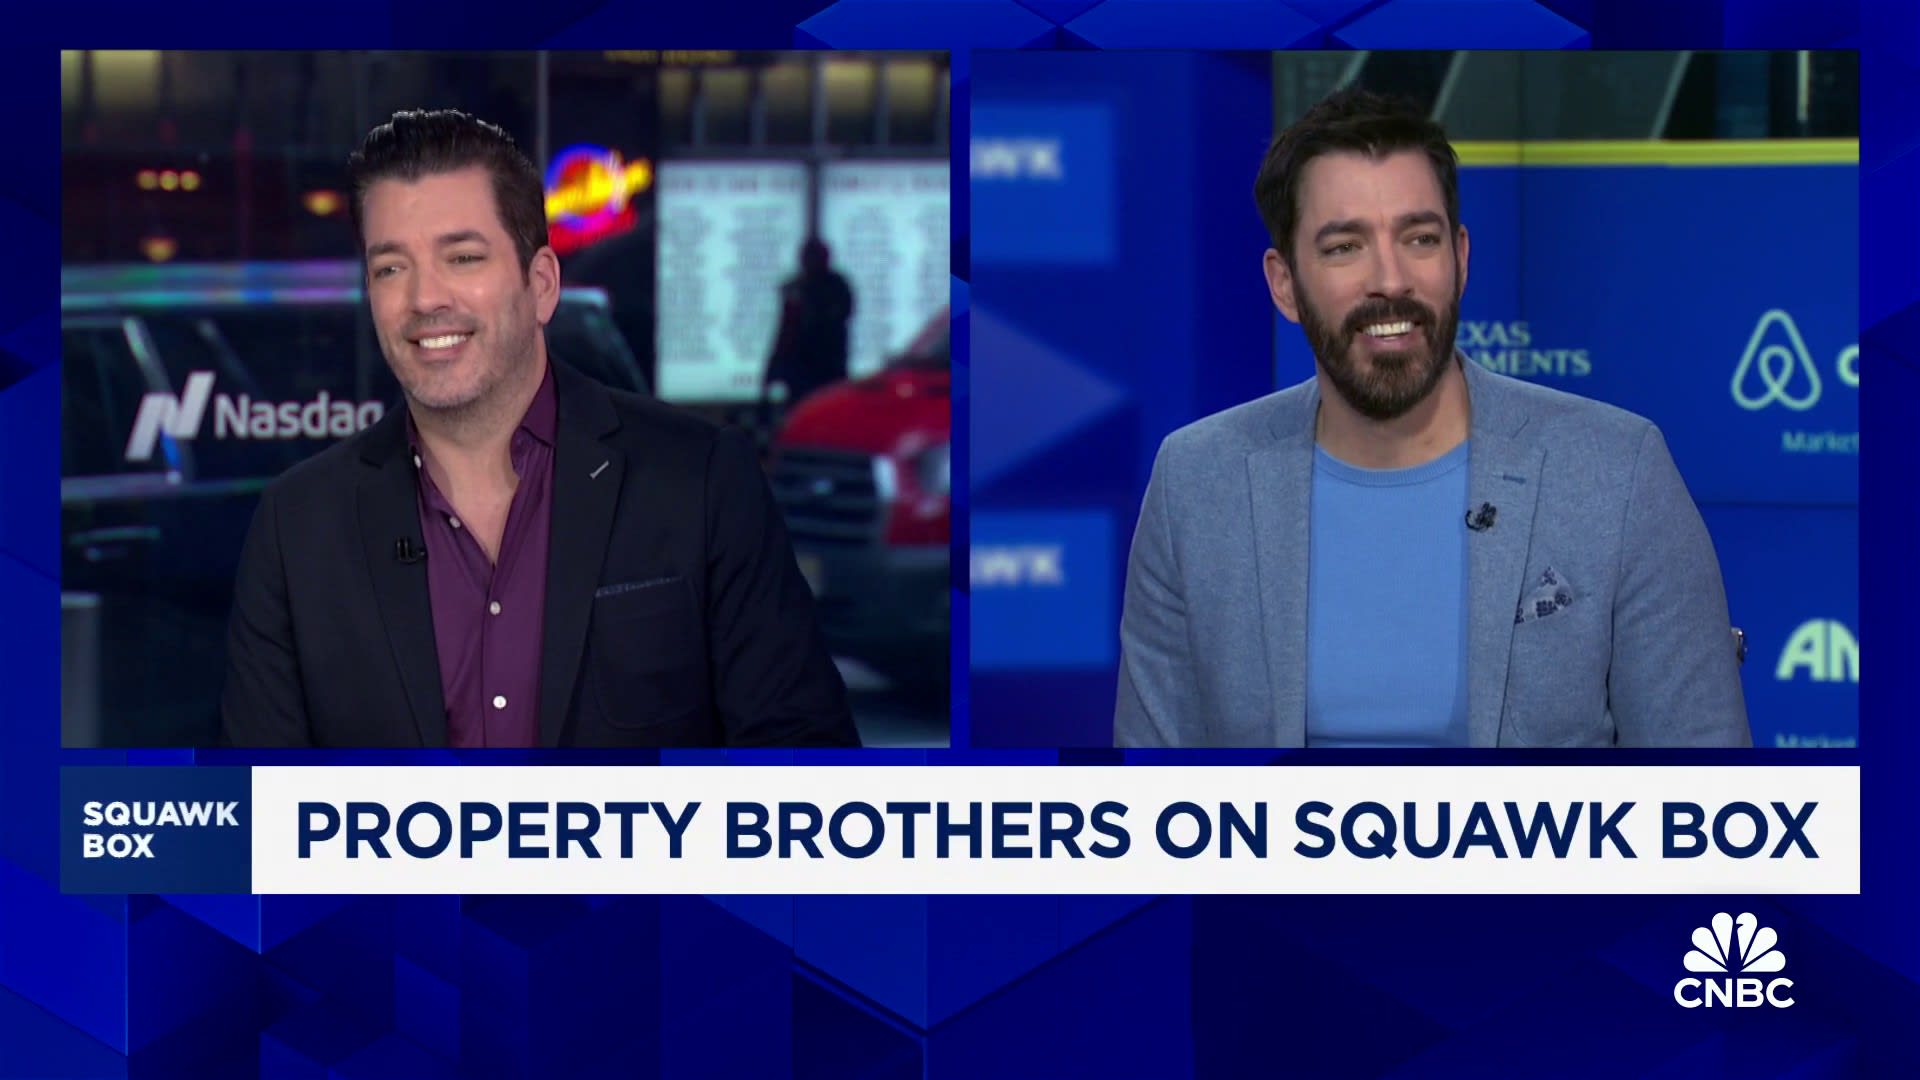 Property Brothers: If you’re going to buy a house, get something you know your family can grow into [Video]